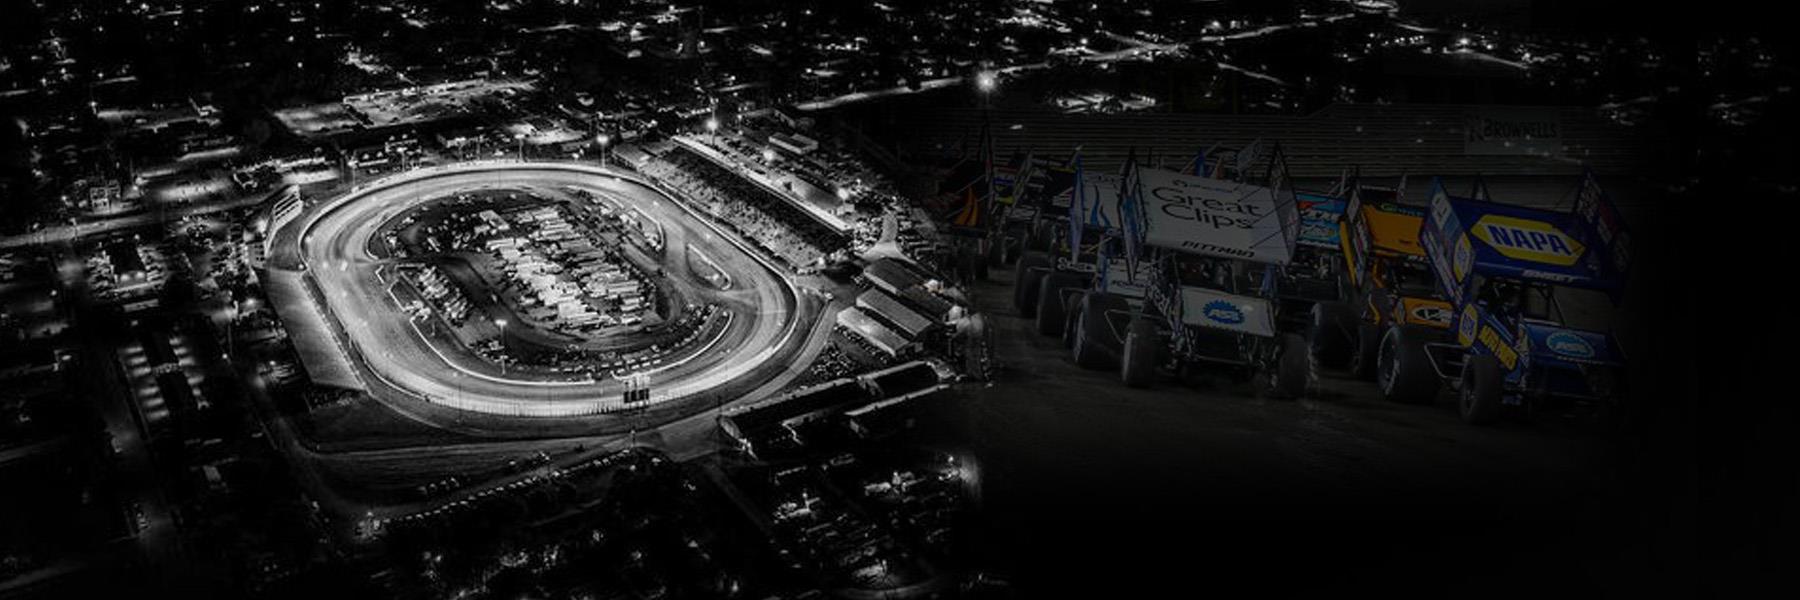 8/12/2021 - Knoxville Raceway